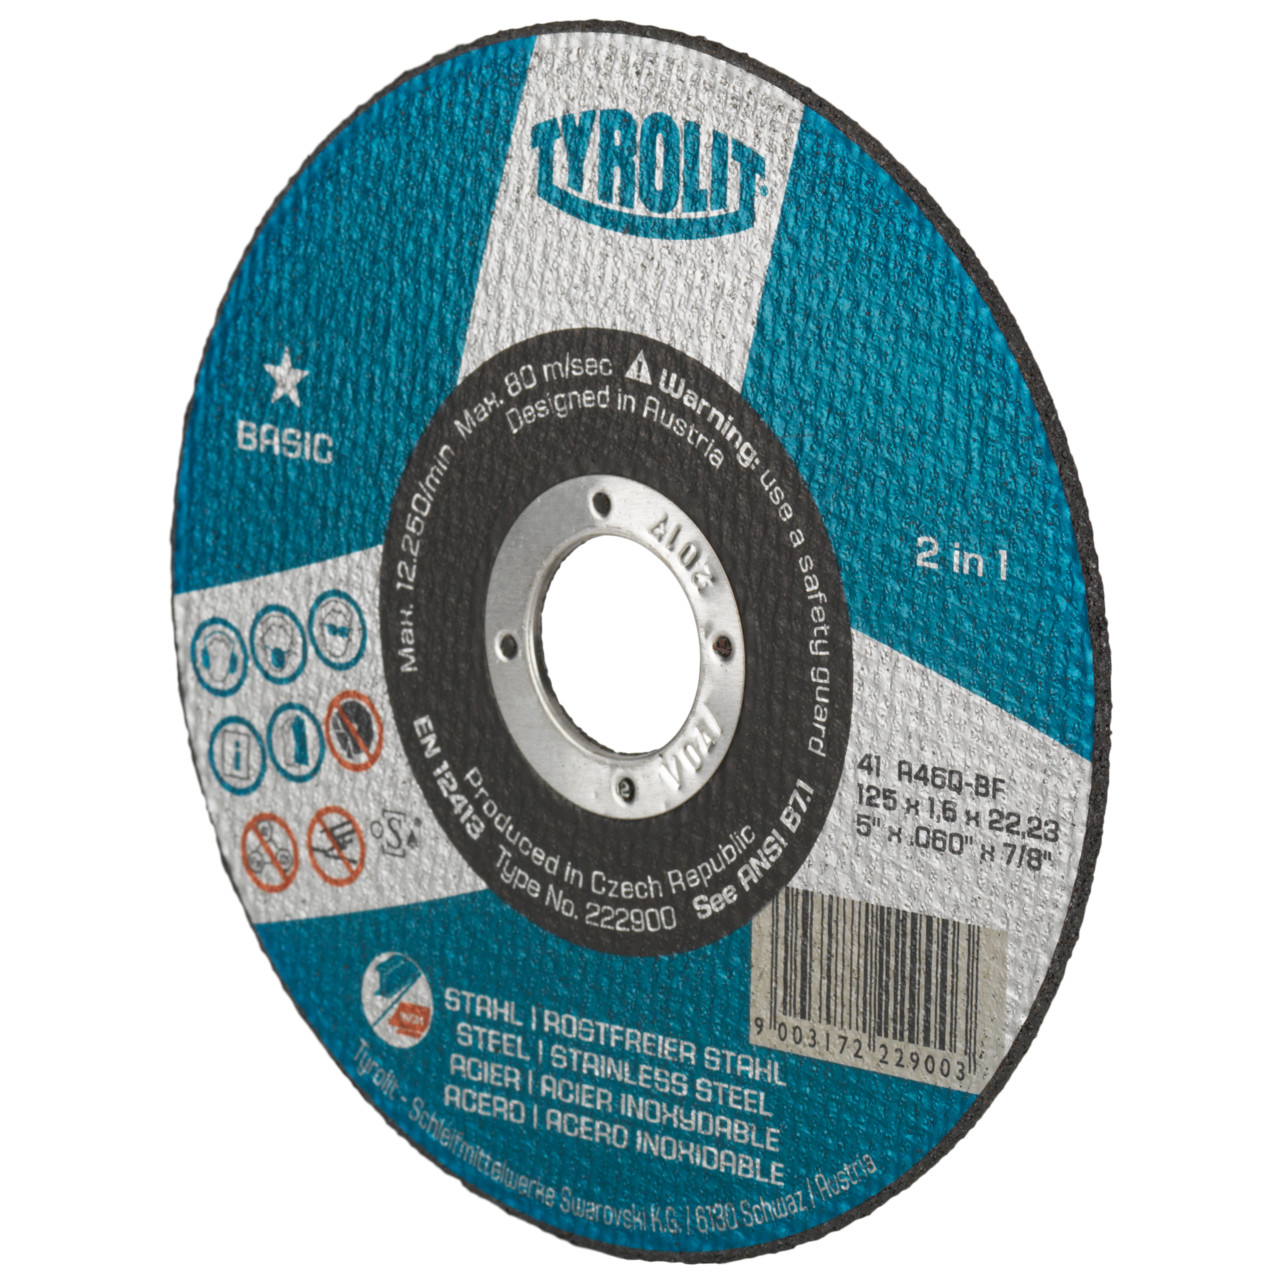 TYROLIT cut-off wheels DxDxH 178x3.0x22.23 2in1 for steel and stainless steel, shape: 41 - straight version, Art. 223000